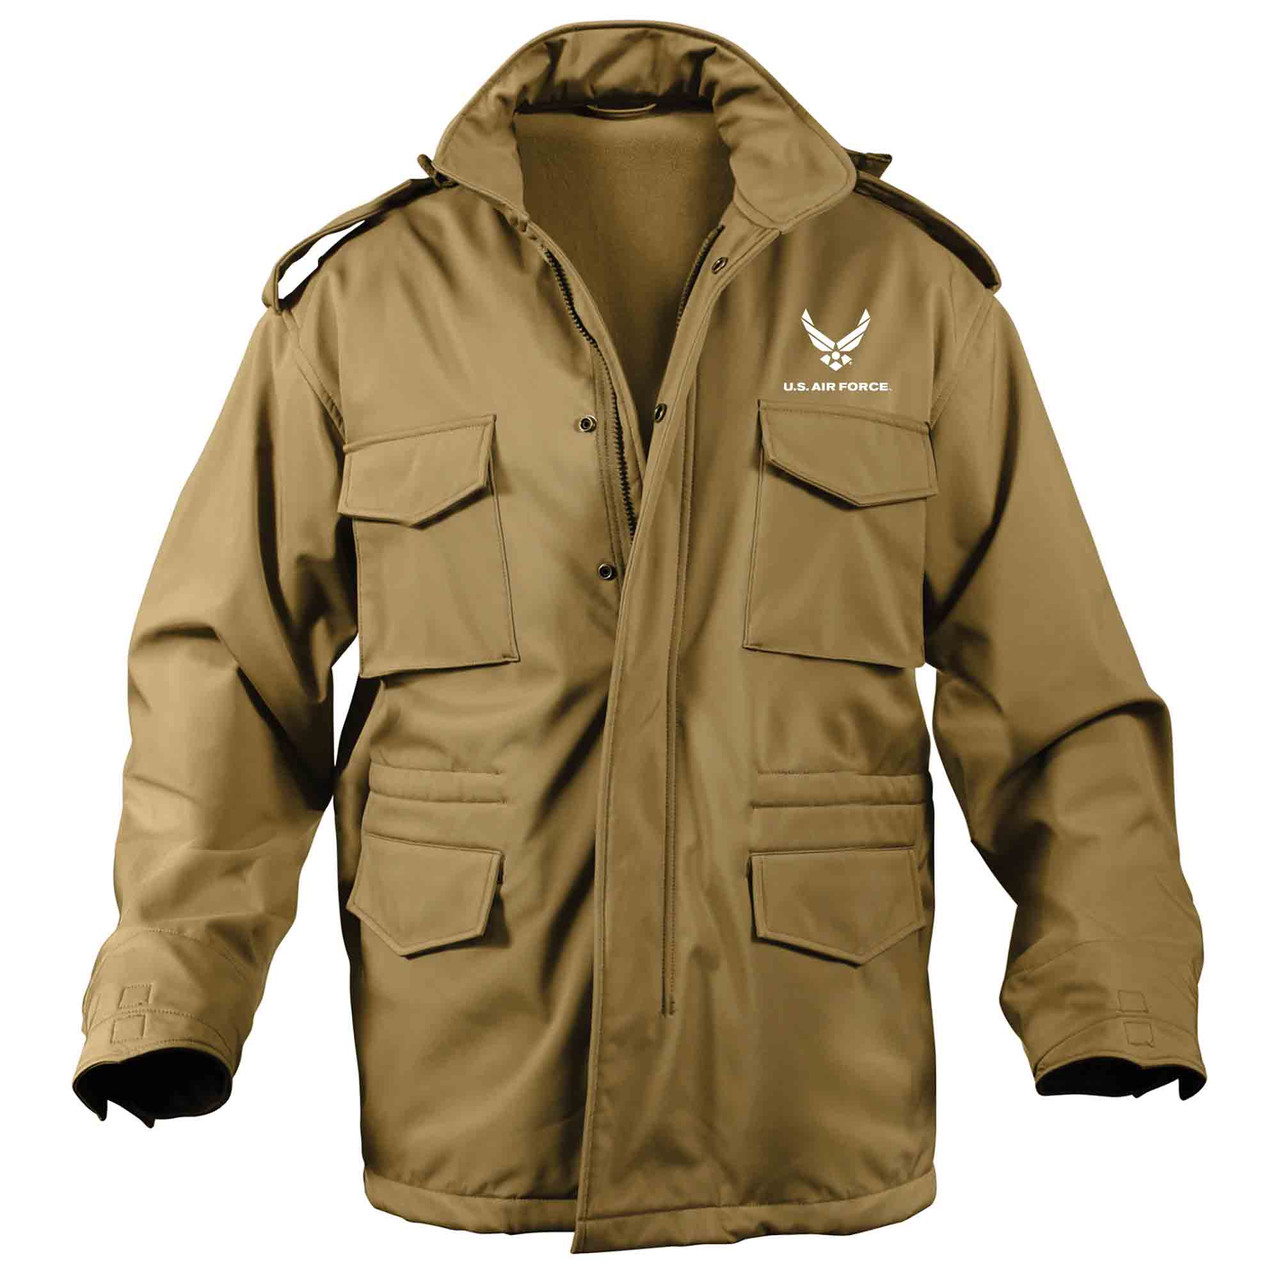 Officially Licensed - Made in the USA: US Air Force Soft Shell Jacket